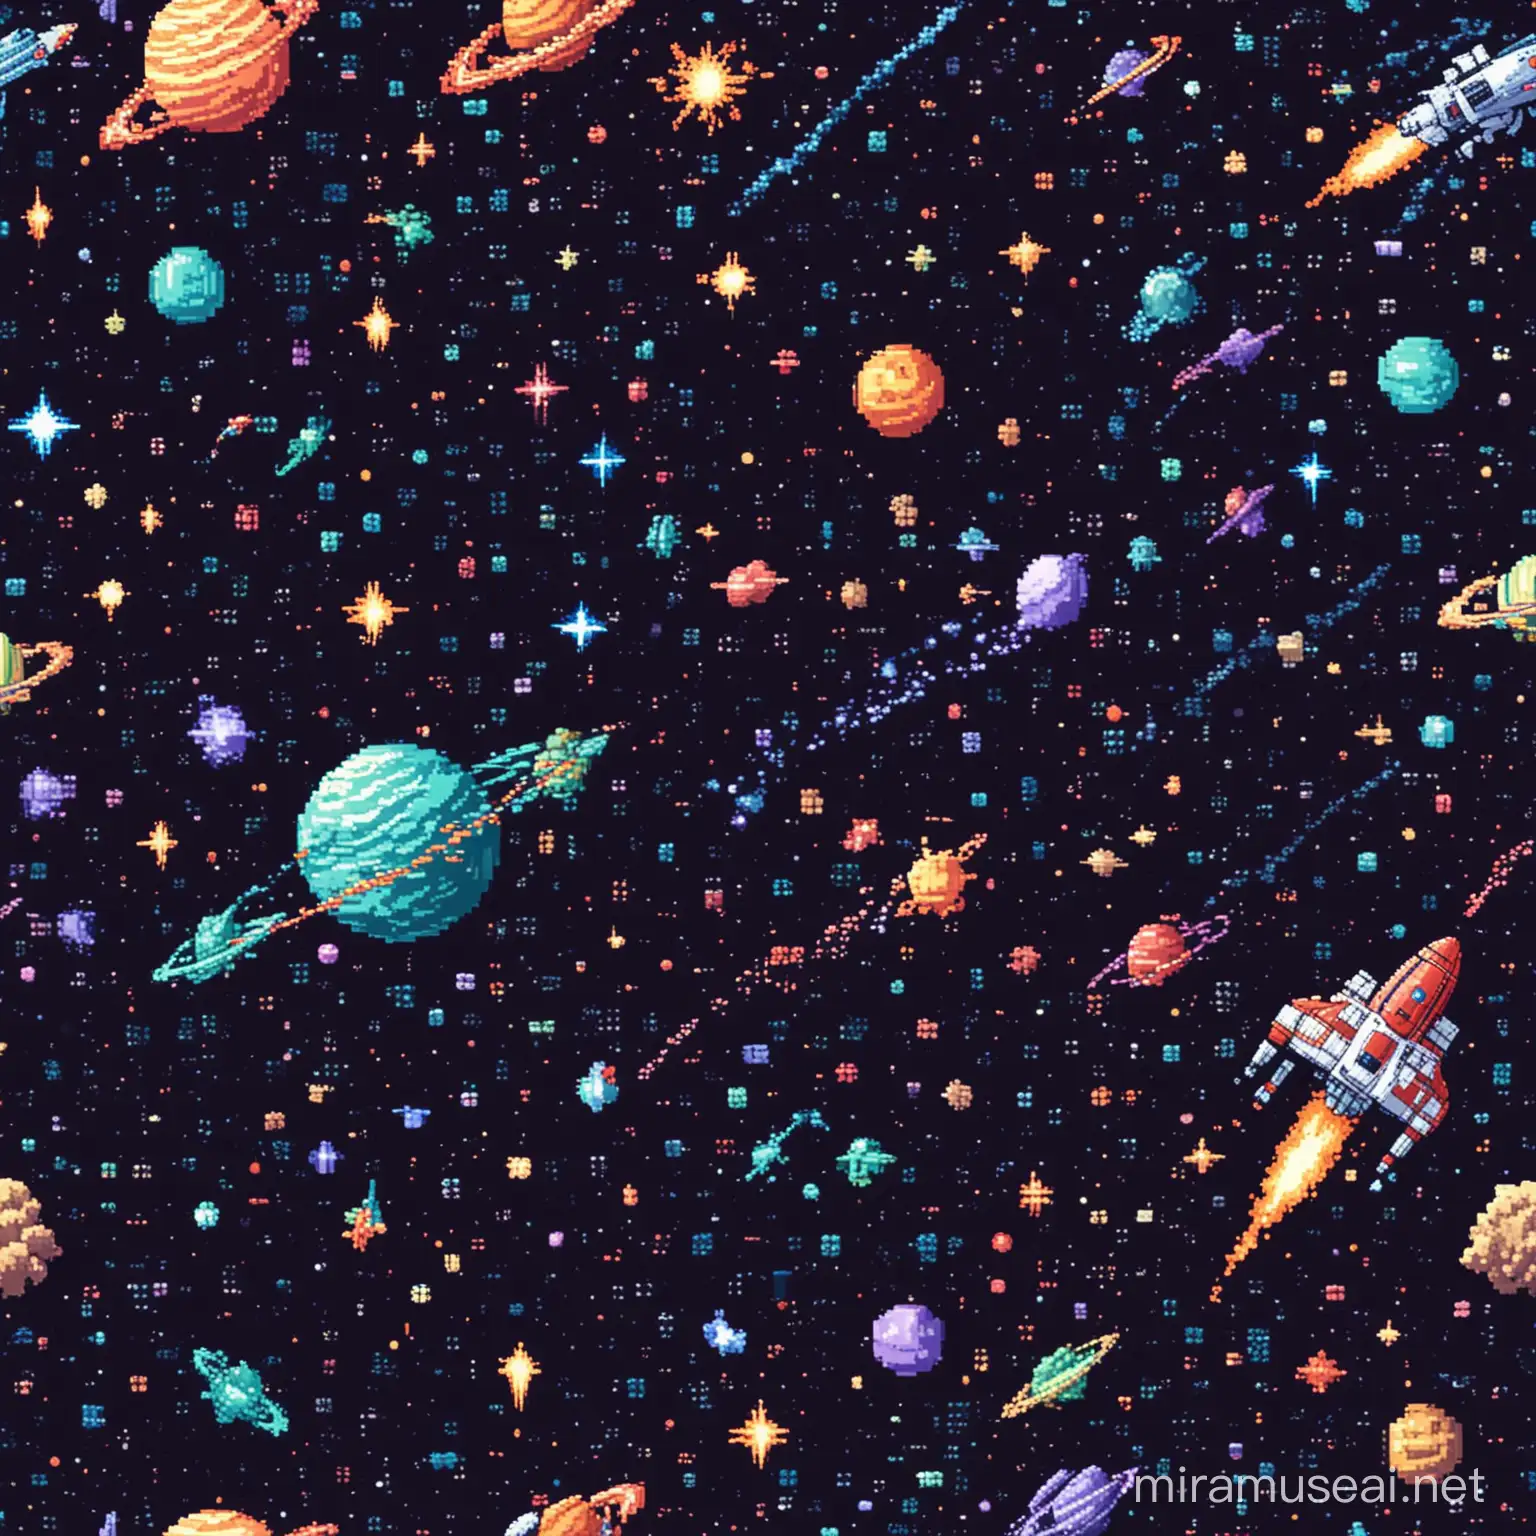 Pixel Art Space Wallpaper Cosmic Scene with Stars and Planets